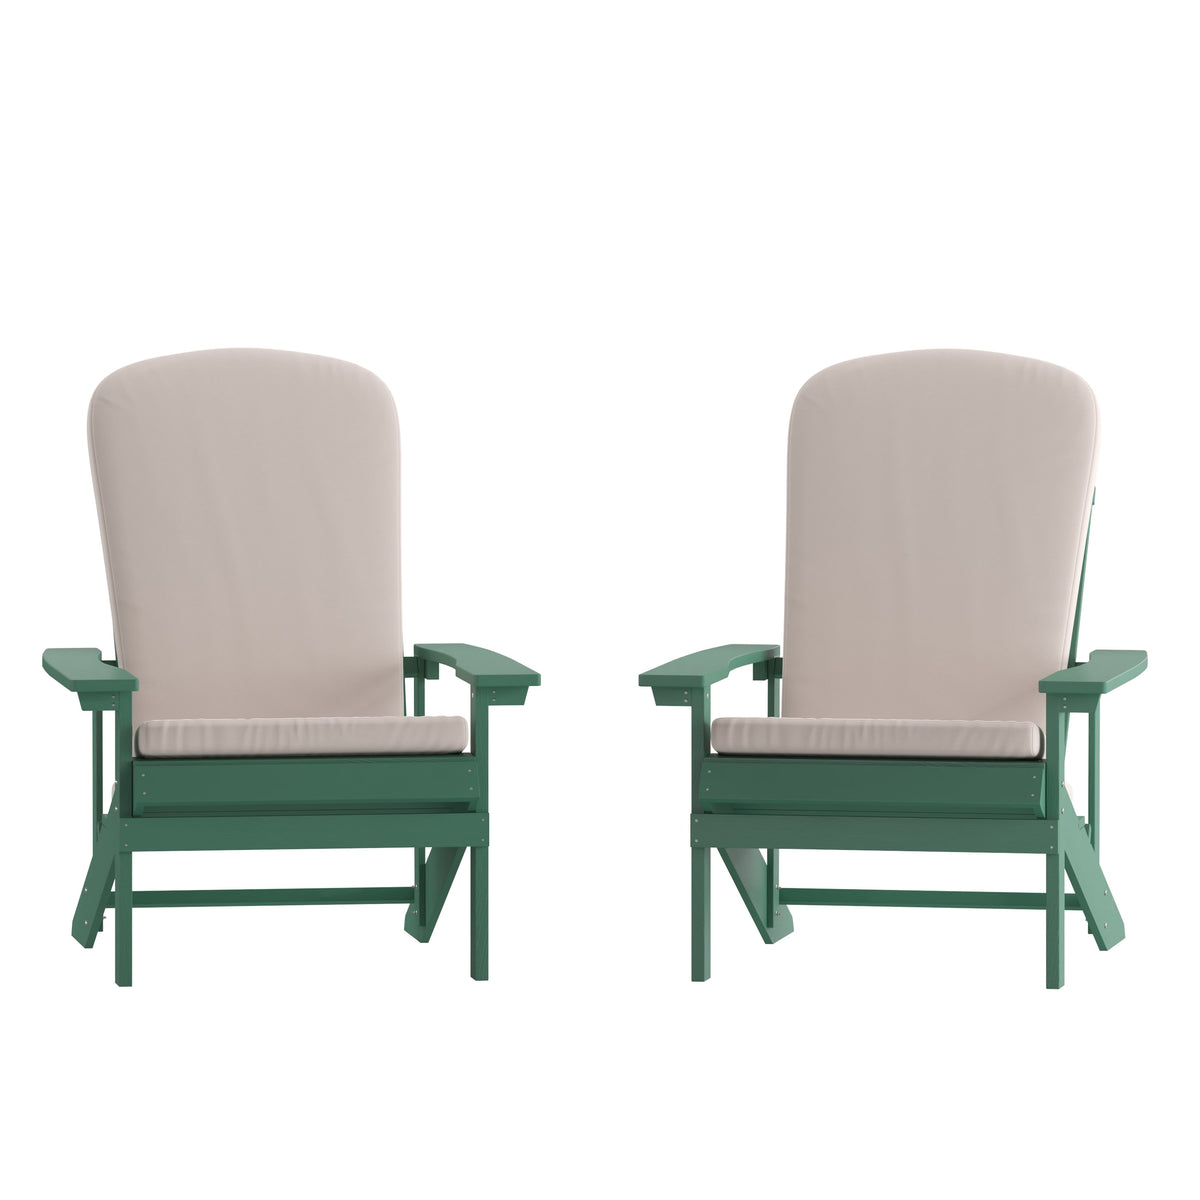 Green/Cream |#| Indoor/Outdoor Green Adirondack Chairs with Cream Cushions - Set of 2